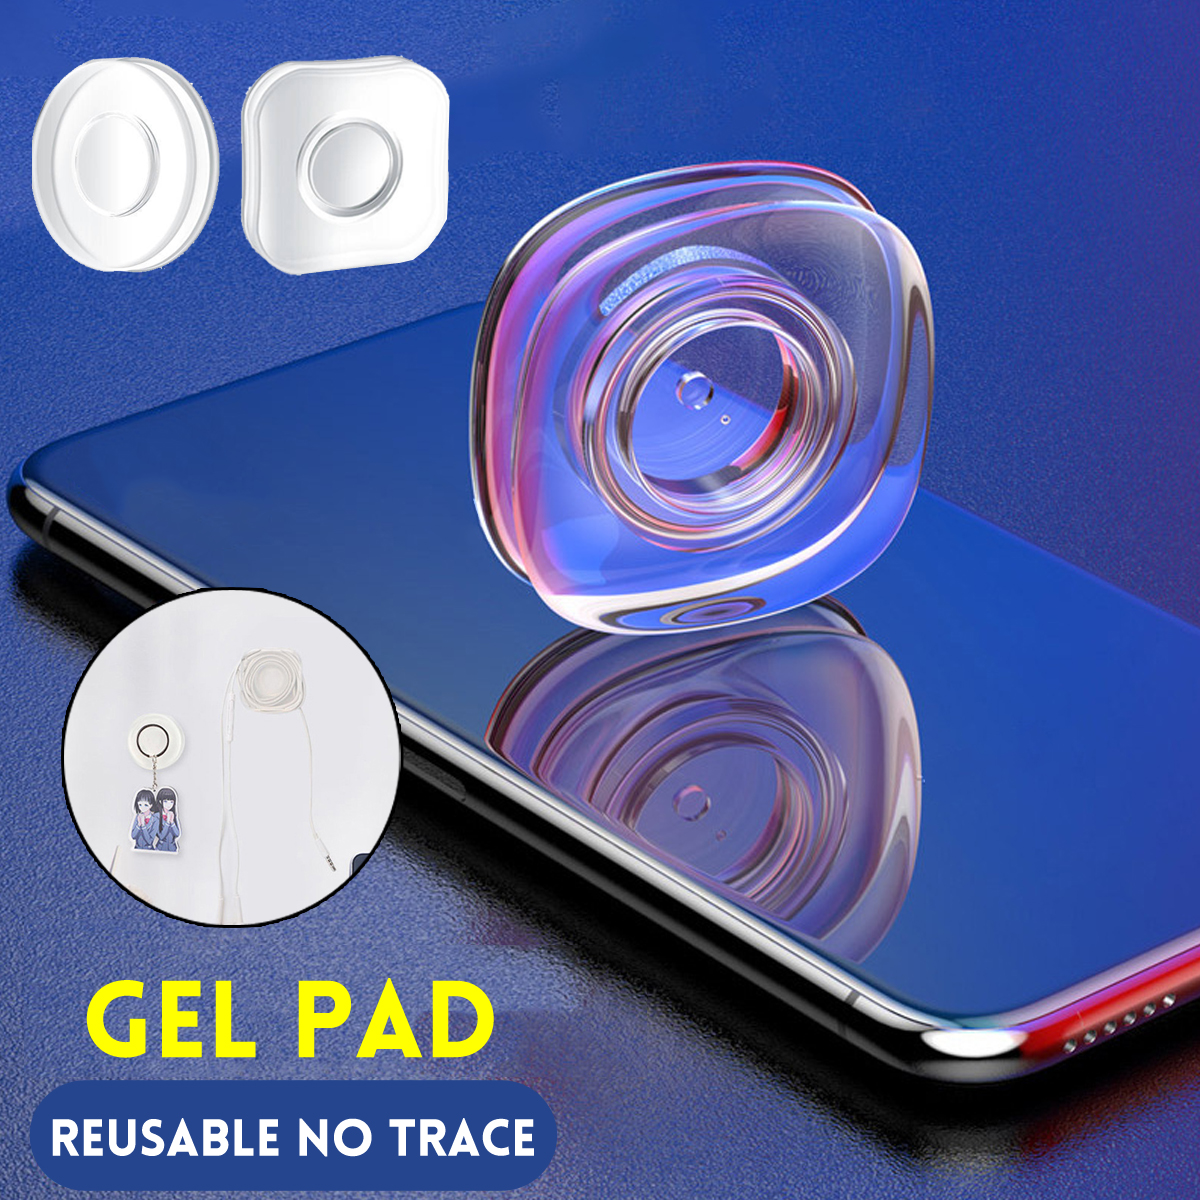 Reusable-Gel-Pad-Magic-Sticker-Washable-Traceless-Casual-Paste-Pad-Phone-Holder-1672213-4